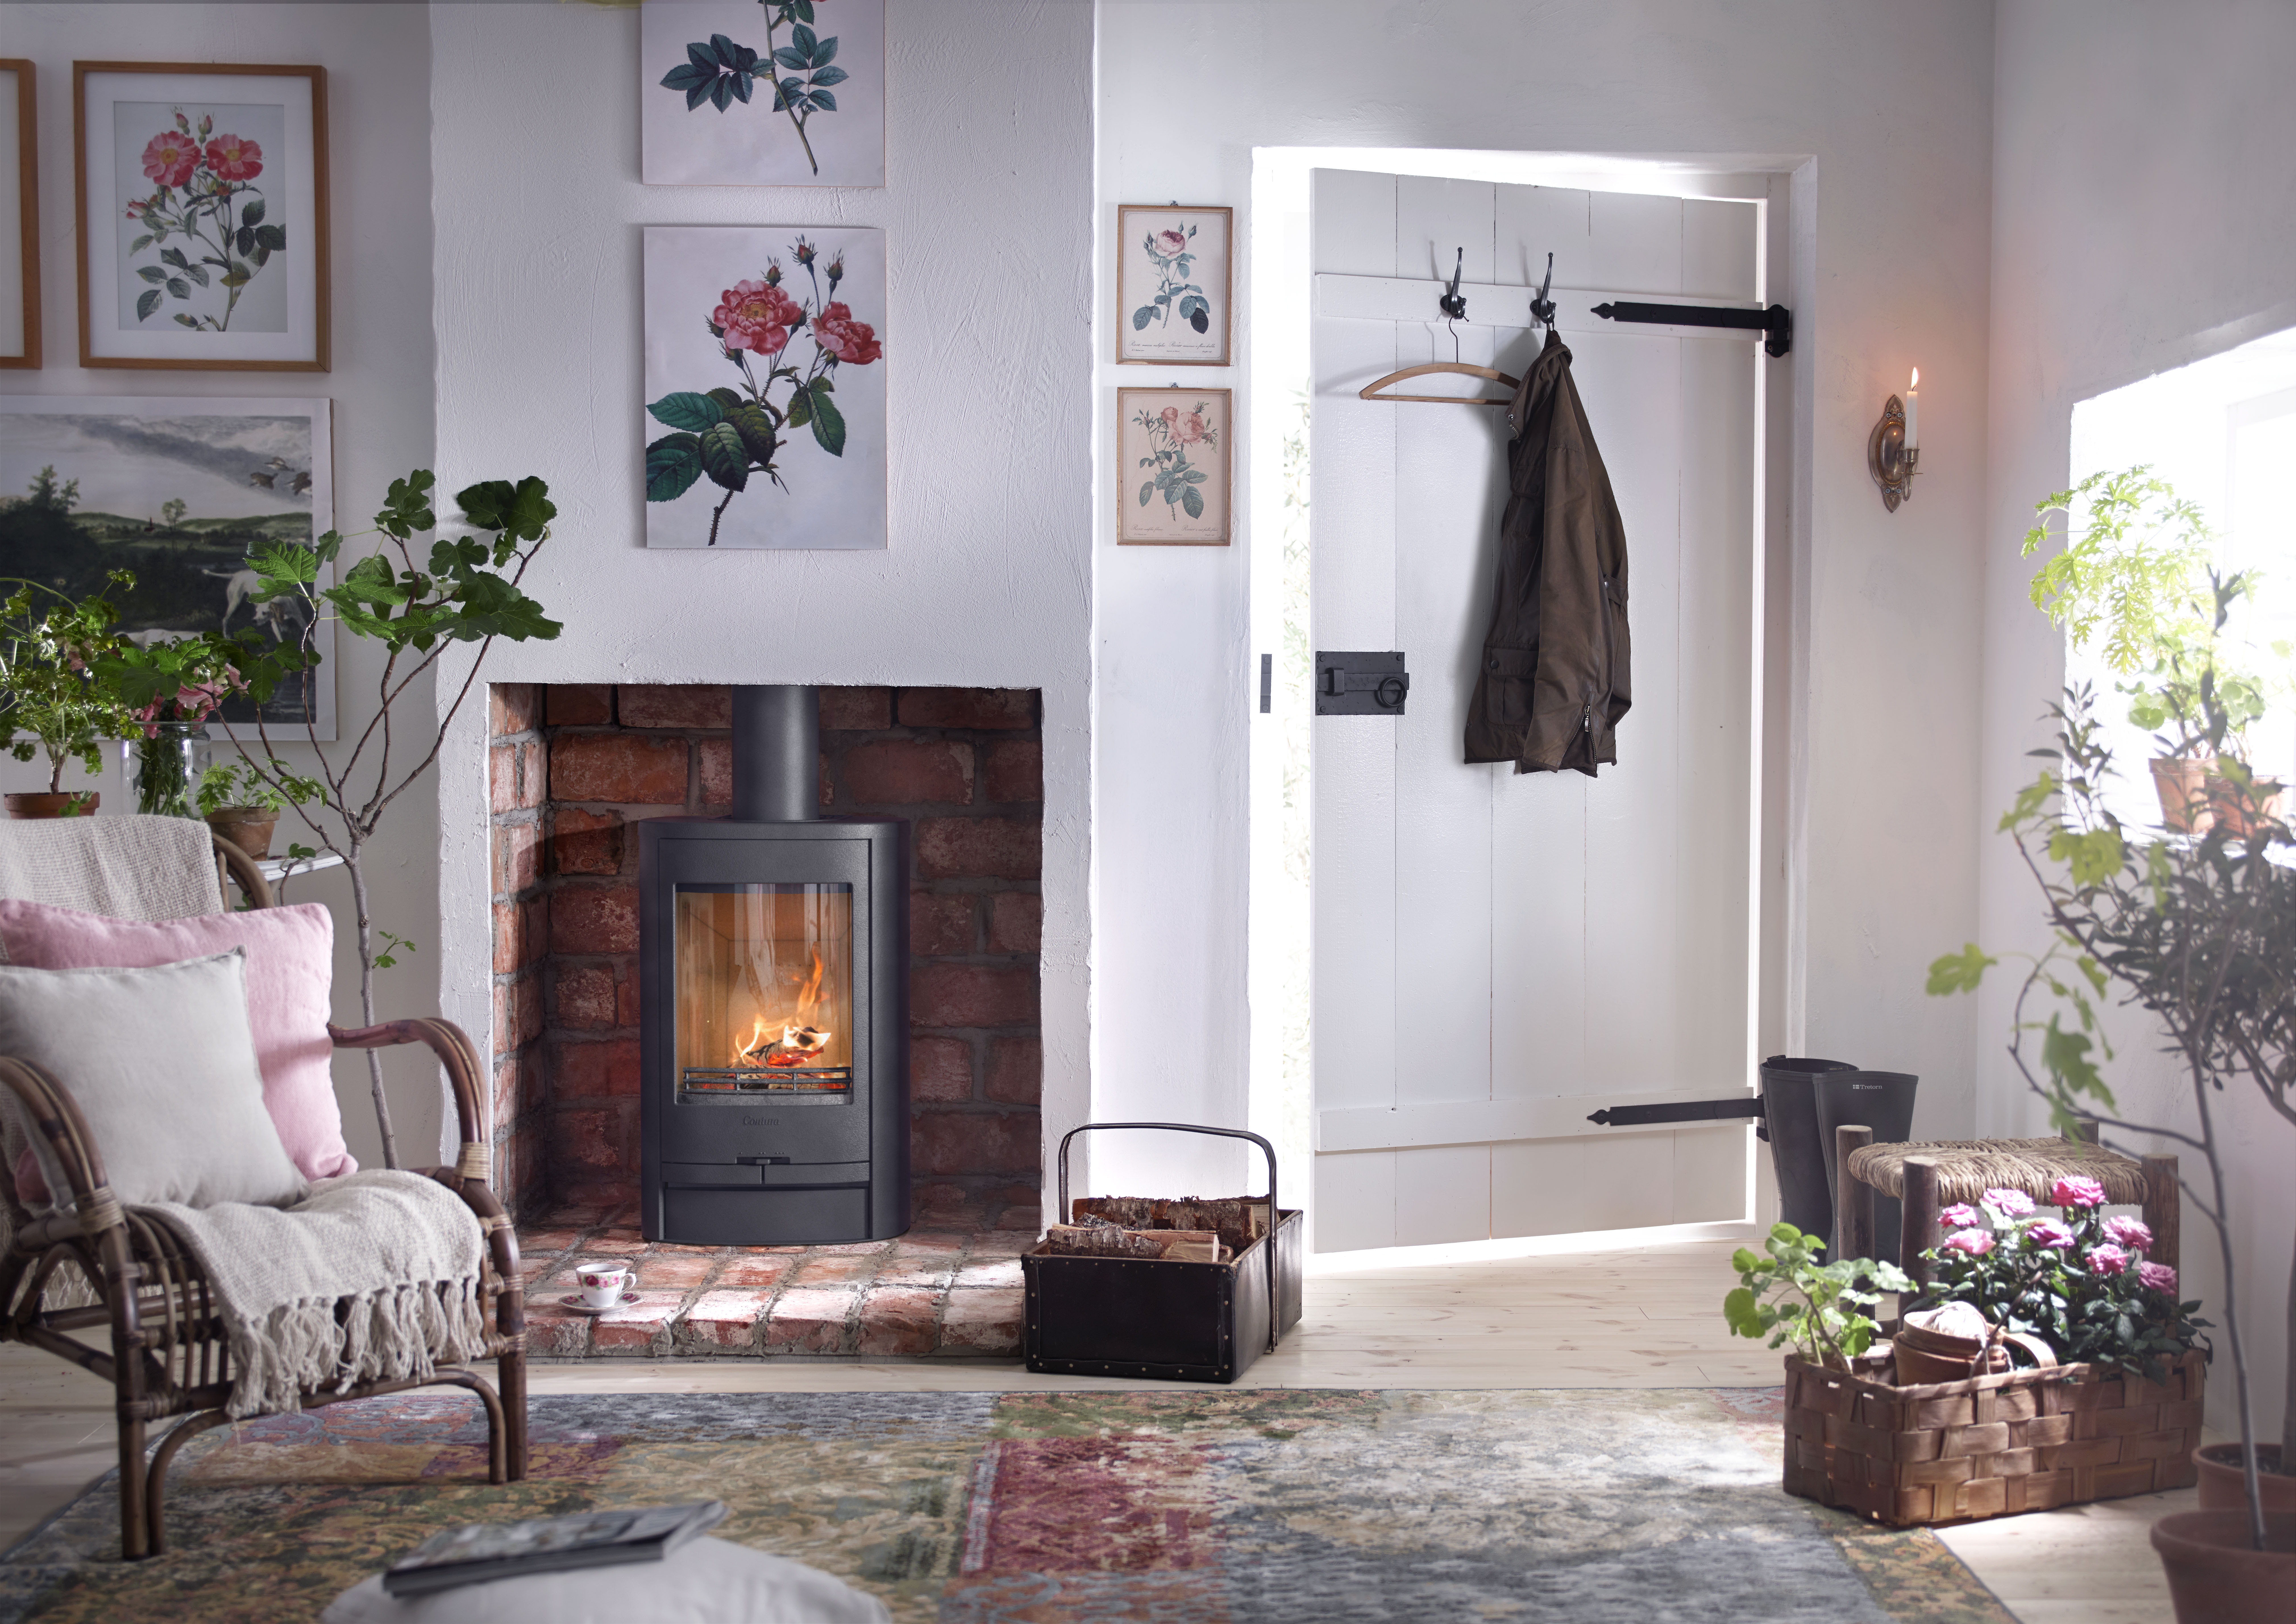 An example of a wood burning stove in a fireplace. Home Statements